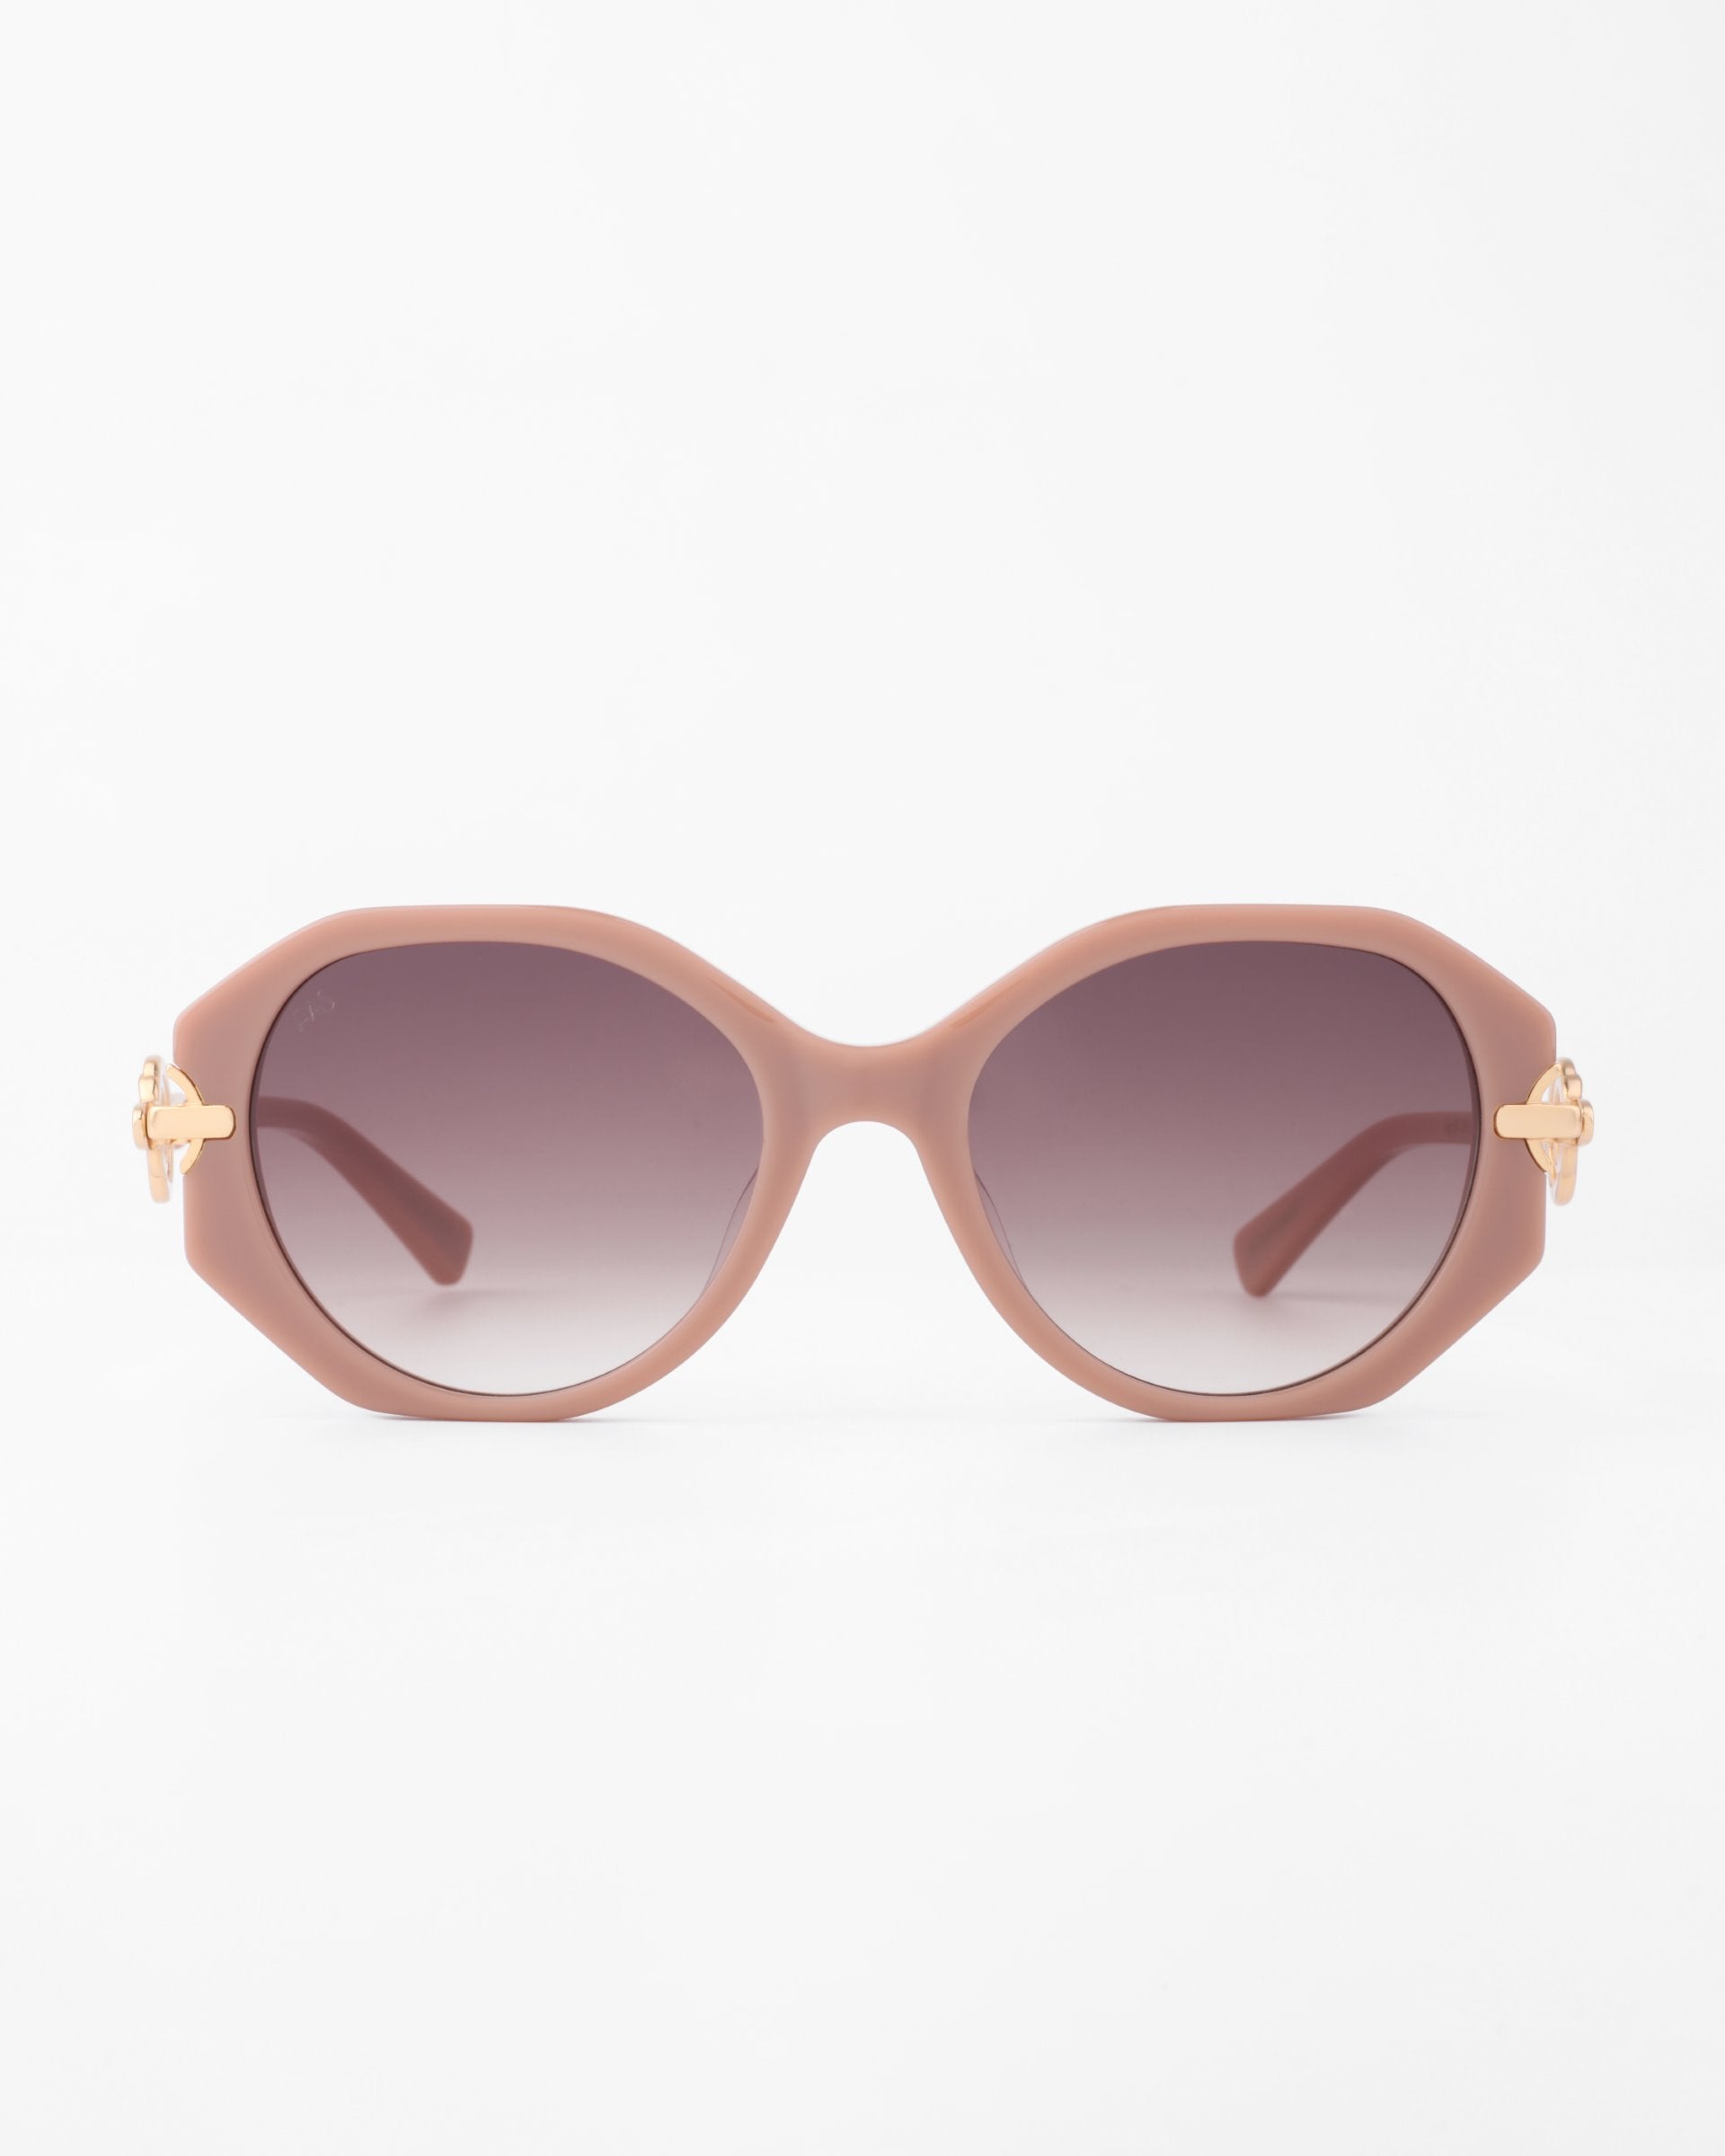 A pair of oversized, rounded sunglasses with light pink, handmade acetate frames and gradient dark lenses. The temples are adorned with gold-plated detailing on each side, adding a touch of elegance to the design. This is the For Art&#39;s Sake® Seaside model. The background is plain white.